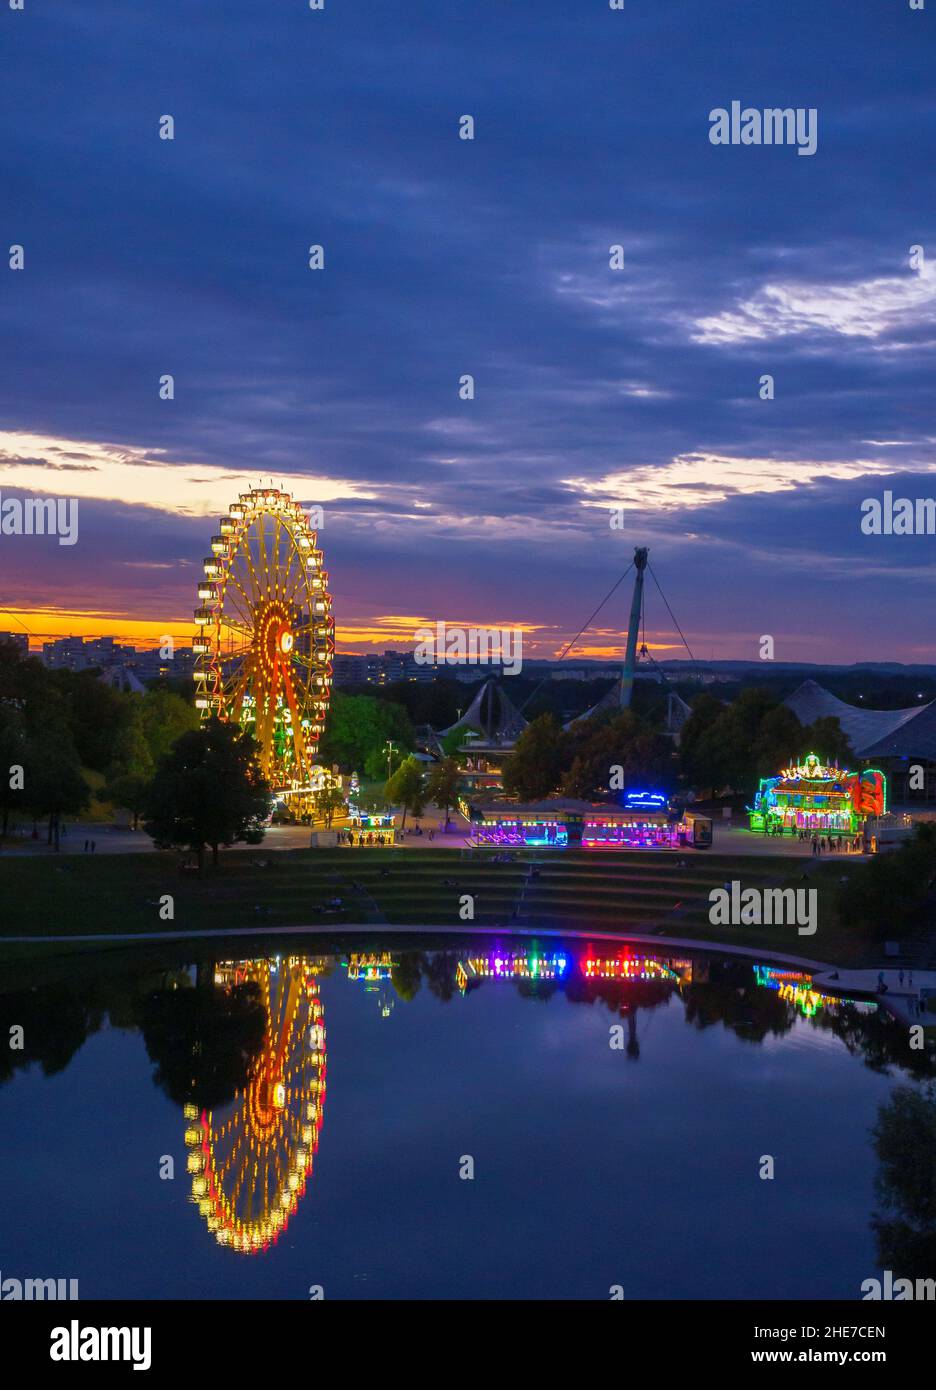 Summer festival in the Olympiapark in Munich, Bavaria, Germany Stock Photo